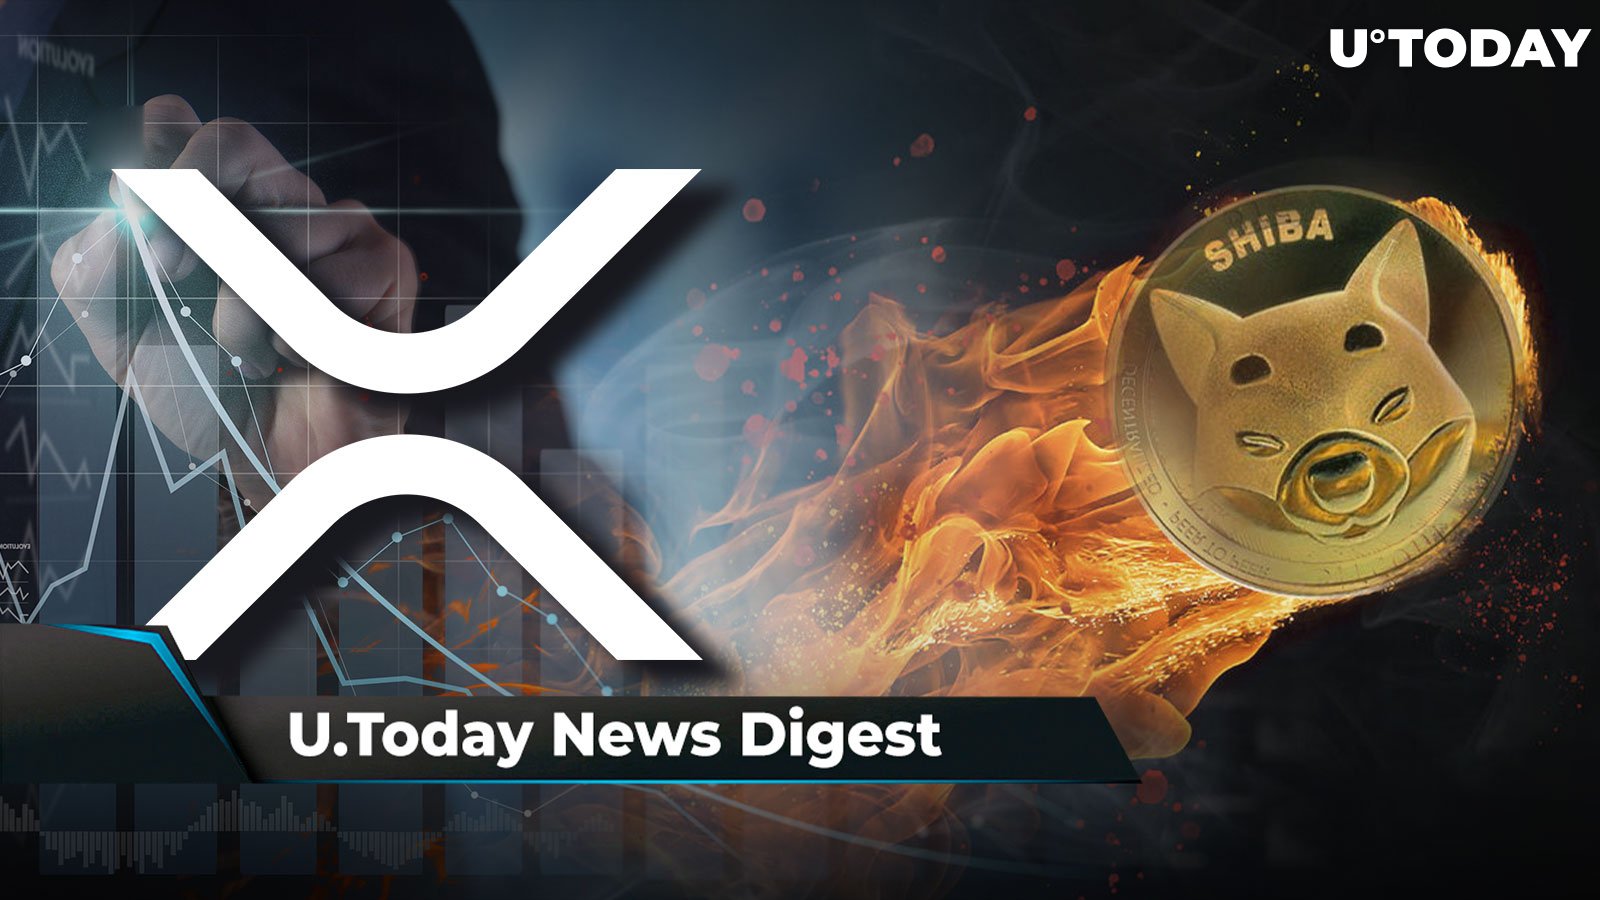 XRP Shows Dangerous Pattern, SHIB Burn Rate Spikes 1,318%, XRP Holders to Receive Airdrop from Major Crypto Exchange: Crypto News Digest by U.Today